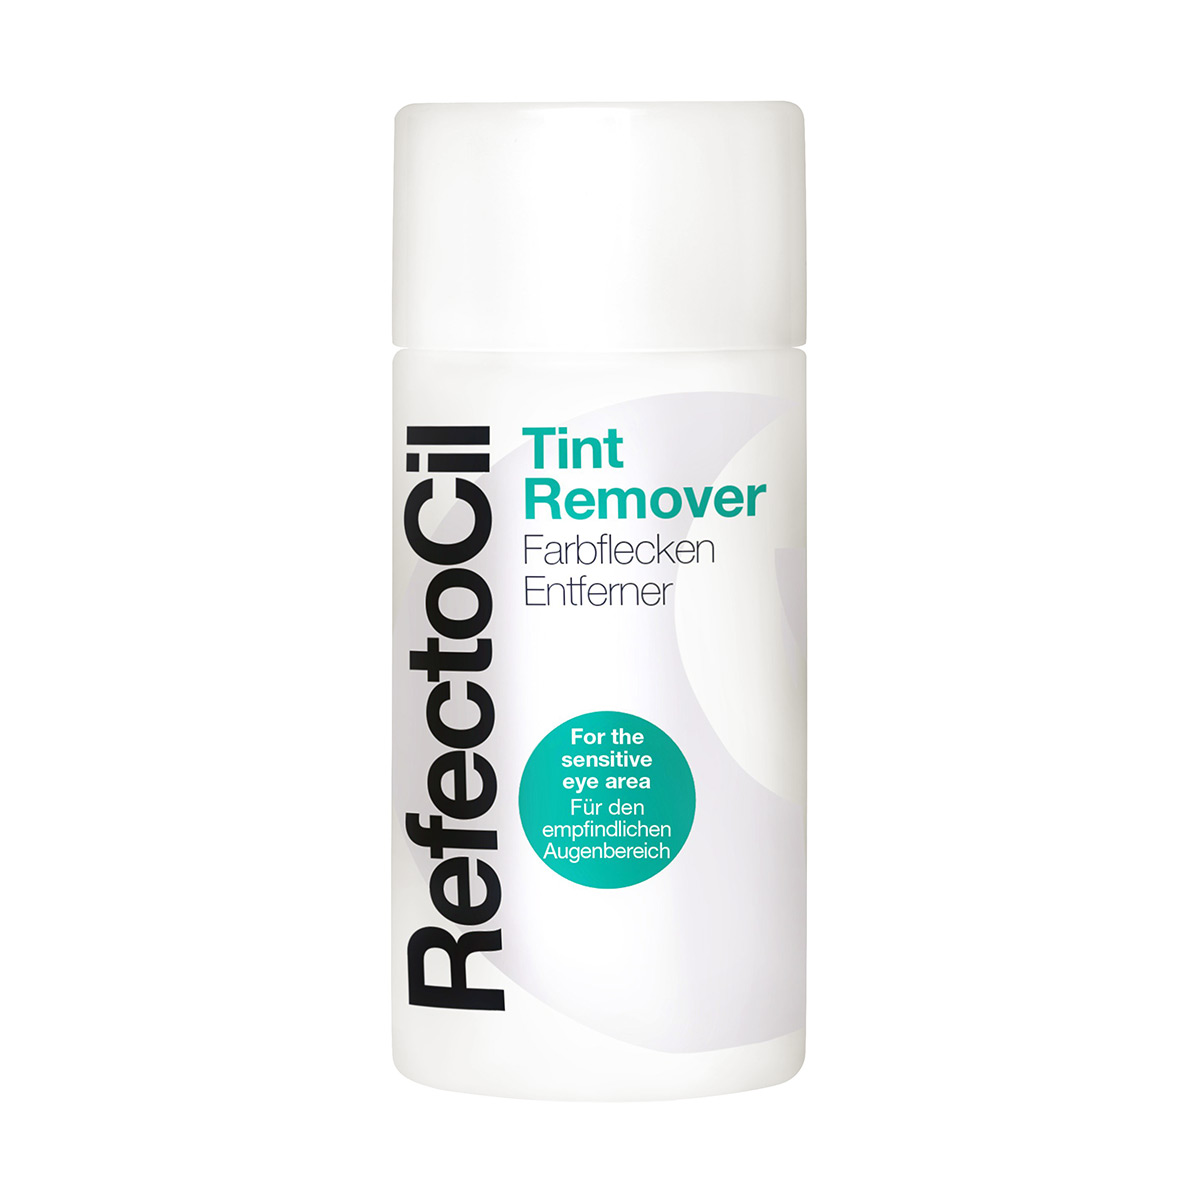 RefectoCil tint remover